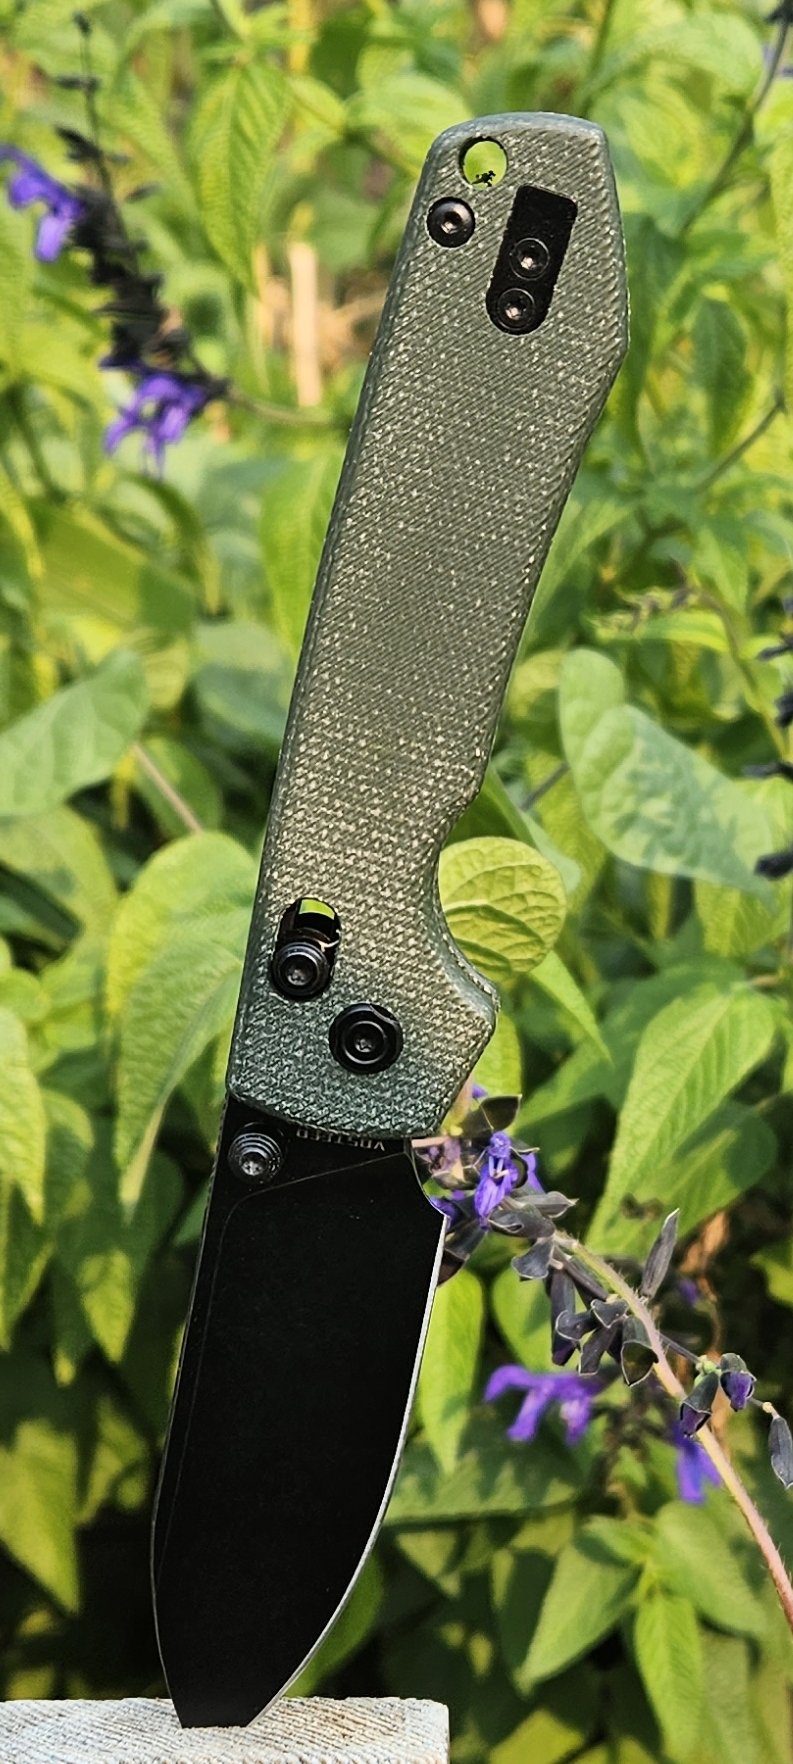 KA-BAR Mule review: a solid knife for your everyday carry - Task